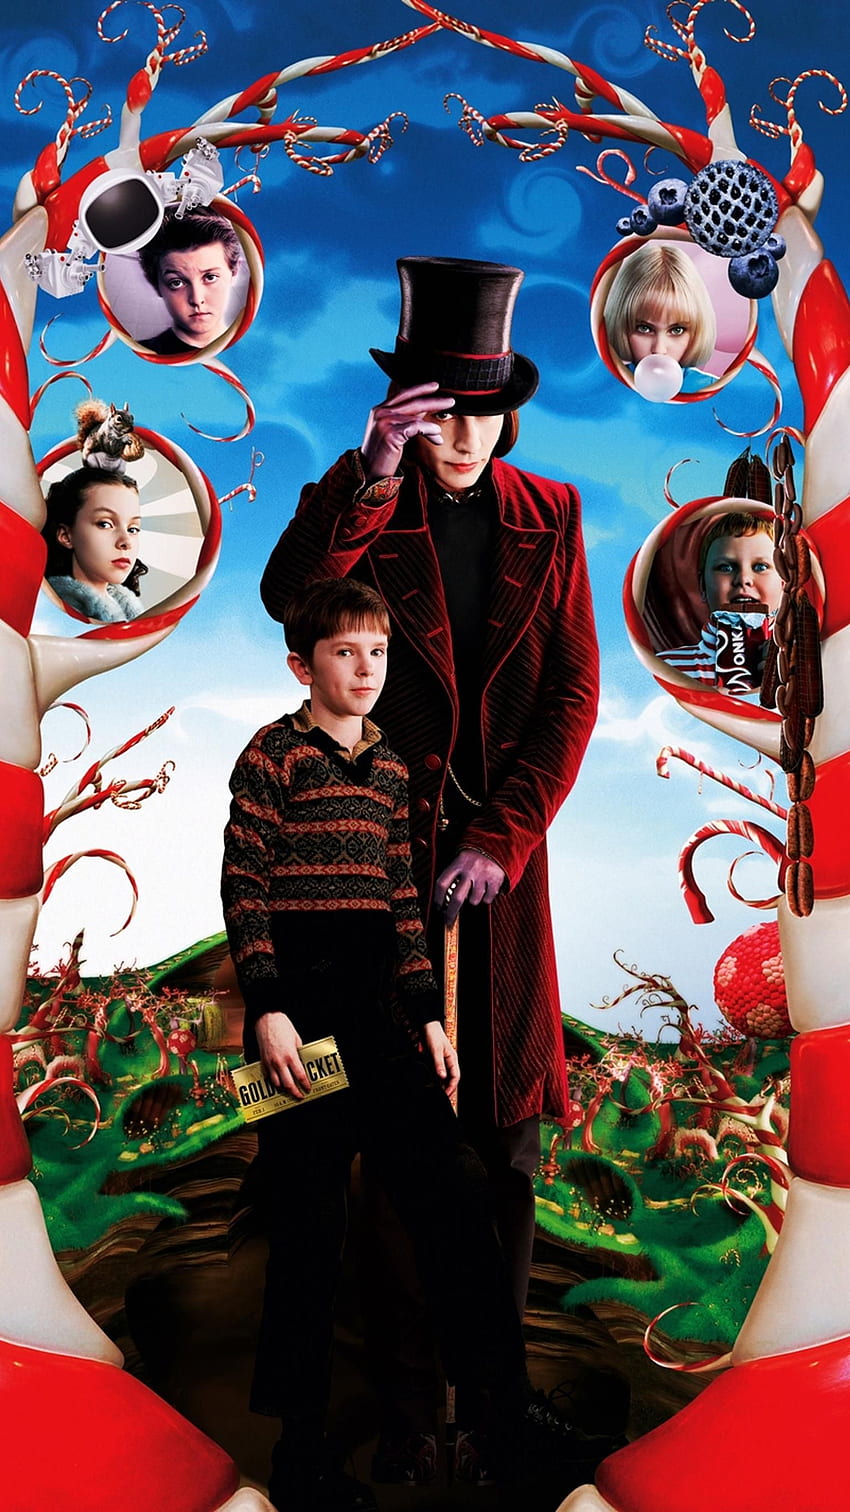 Charlie and the Chocolate Factory (2005) Phone . Moviemania. Chocolate factory, Charlie chocolate factory, Tim burton films HD phone wallpaper